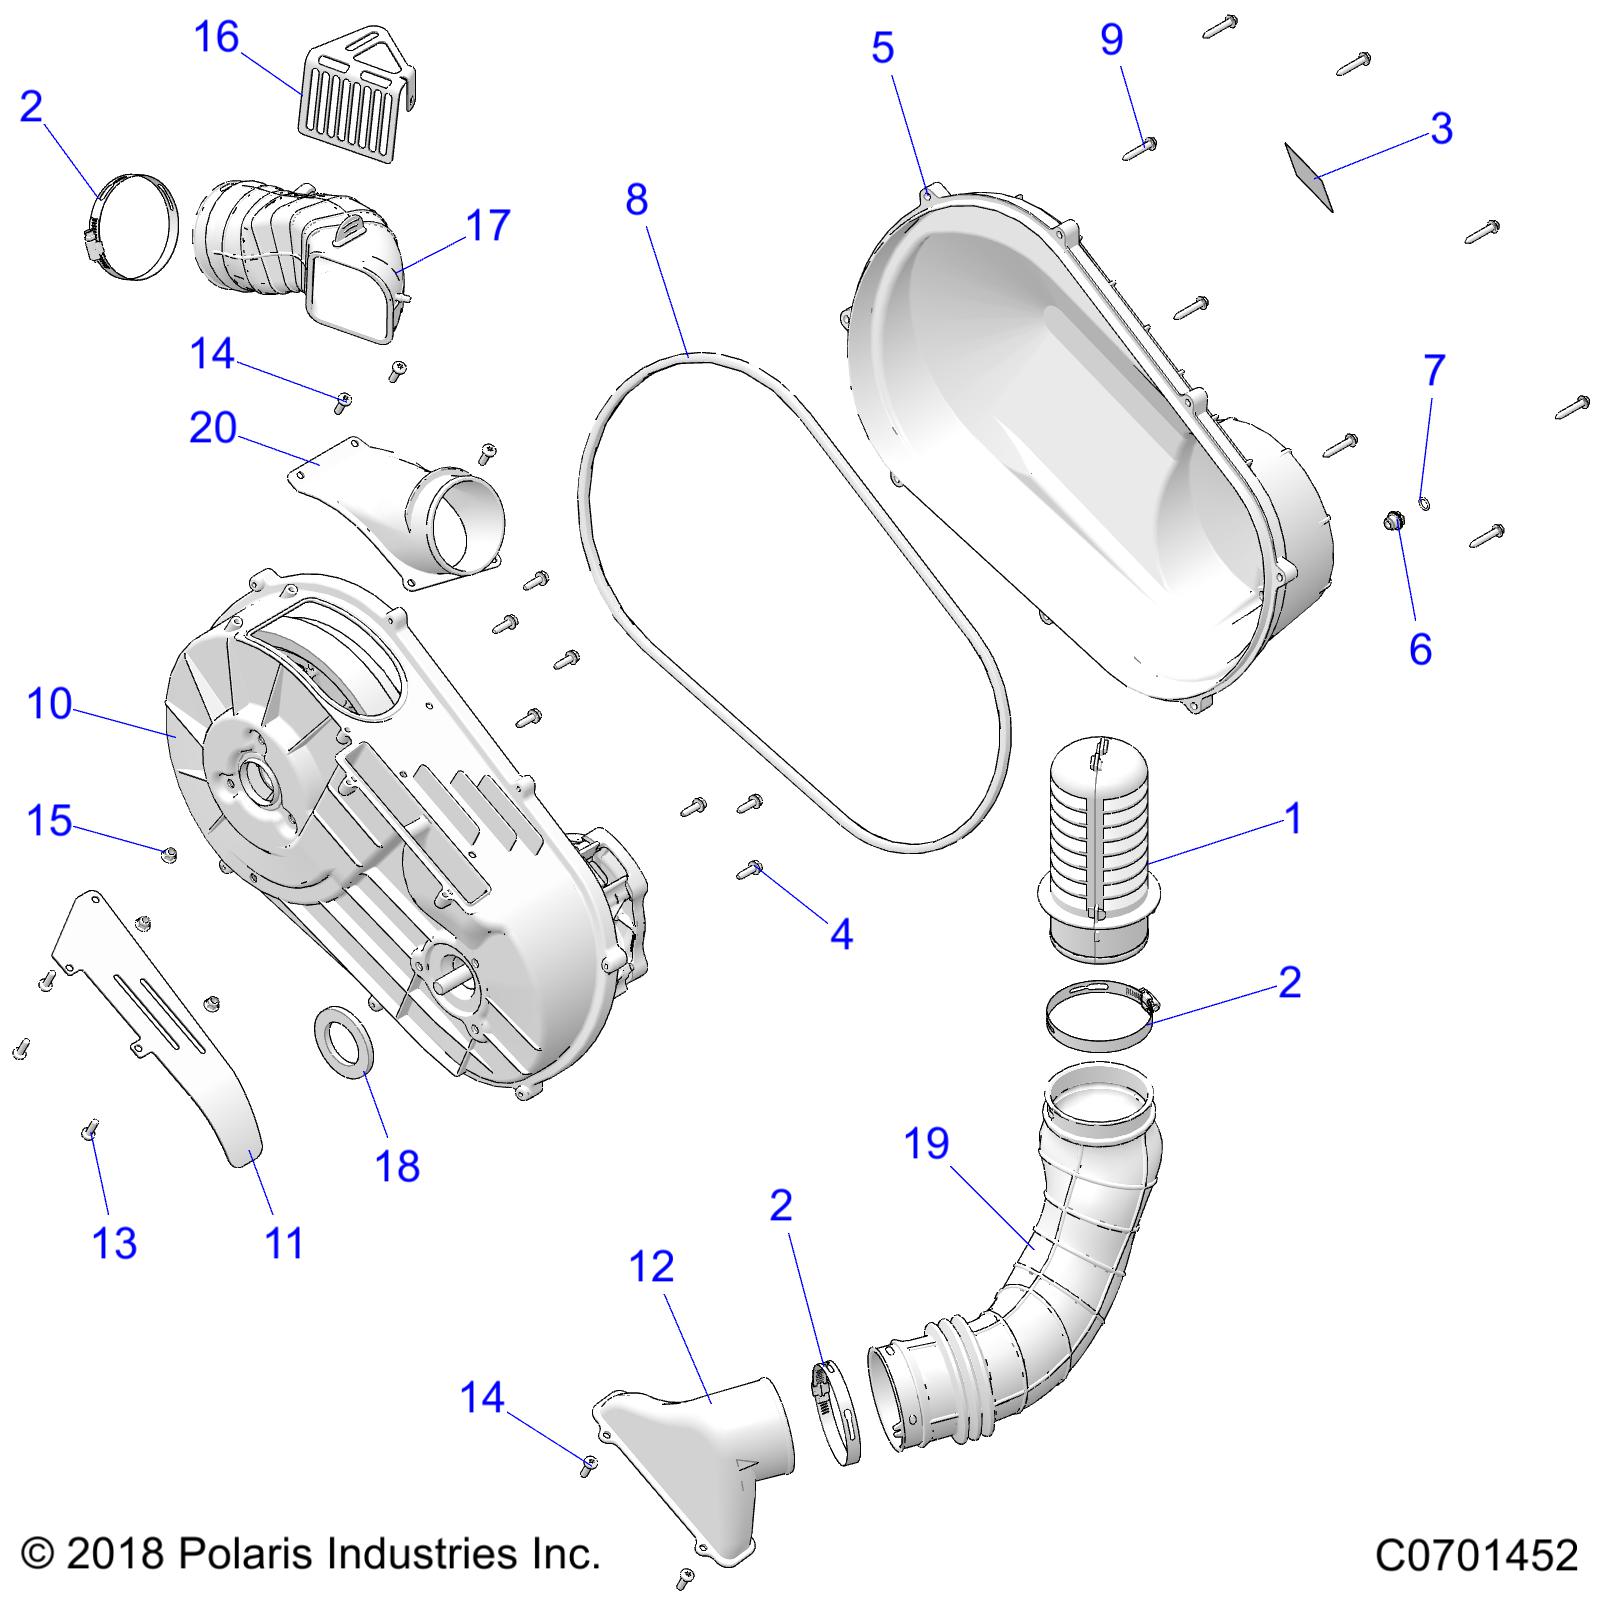 Part Number : 5451062 CLUTCH HOSE  AIR INLET